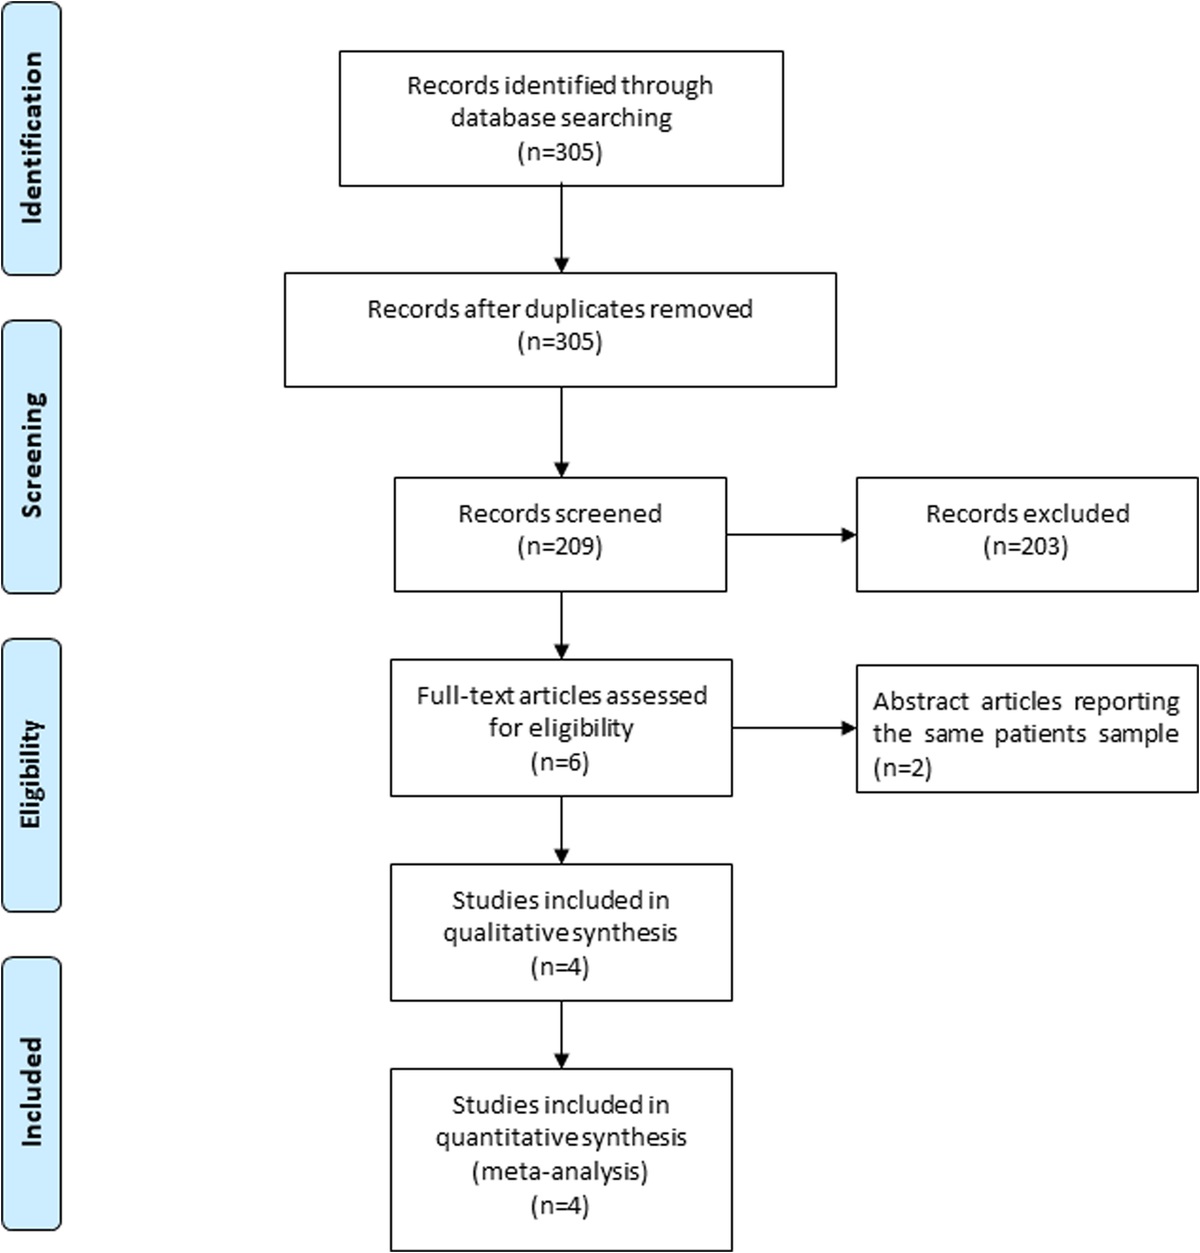 The Efficacy and Safety of Adjuvant Lomustine to Chemotherapy for Recurrent Glioblastoma: A Meta-analysis of Randomized Controlled Studies